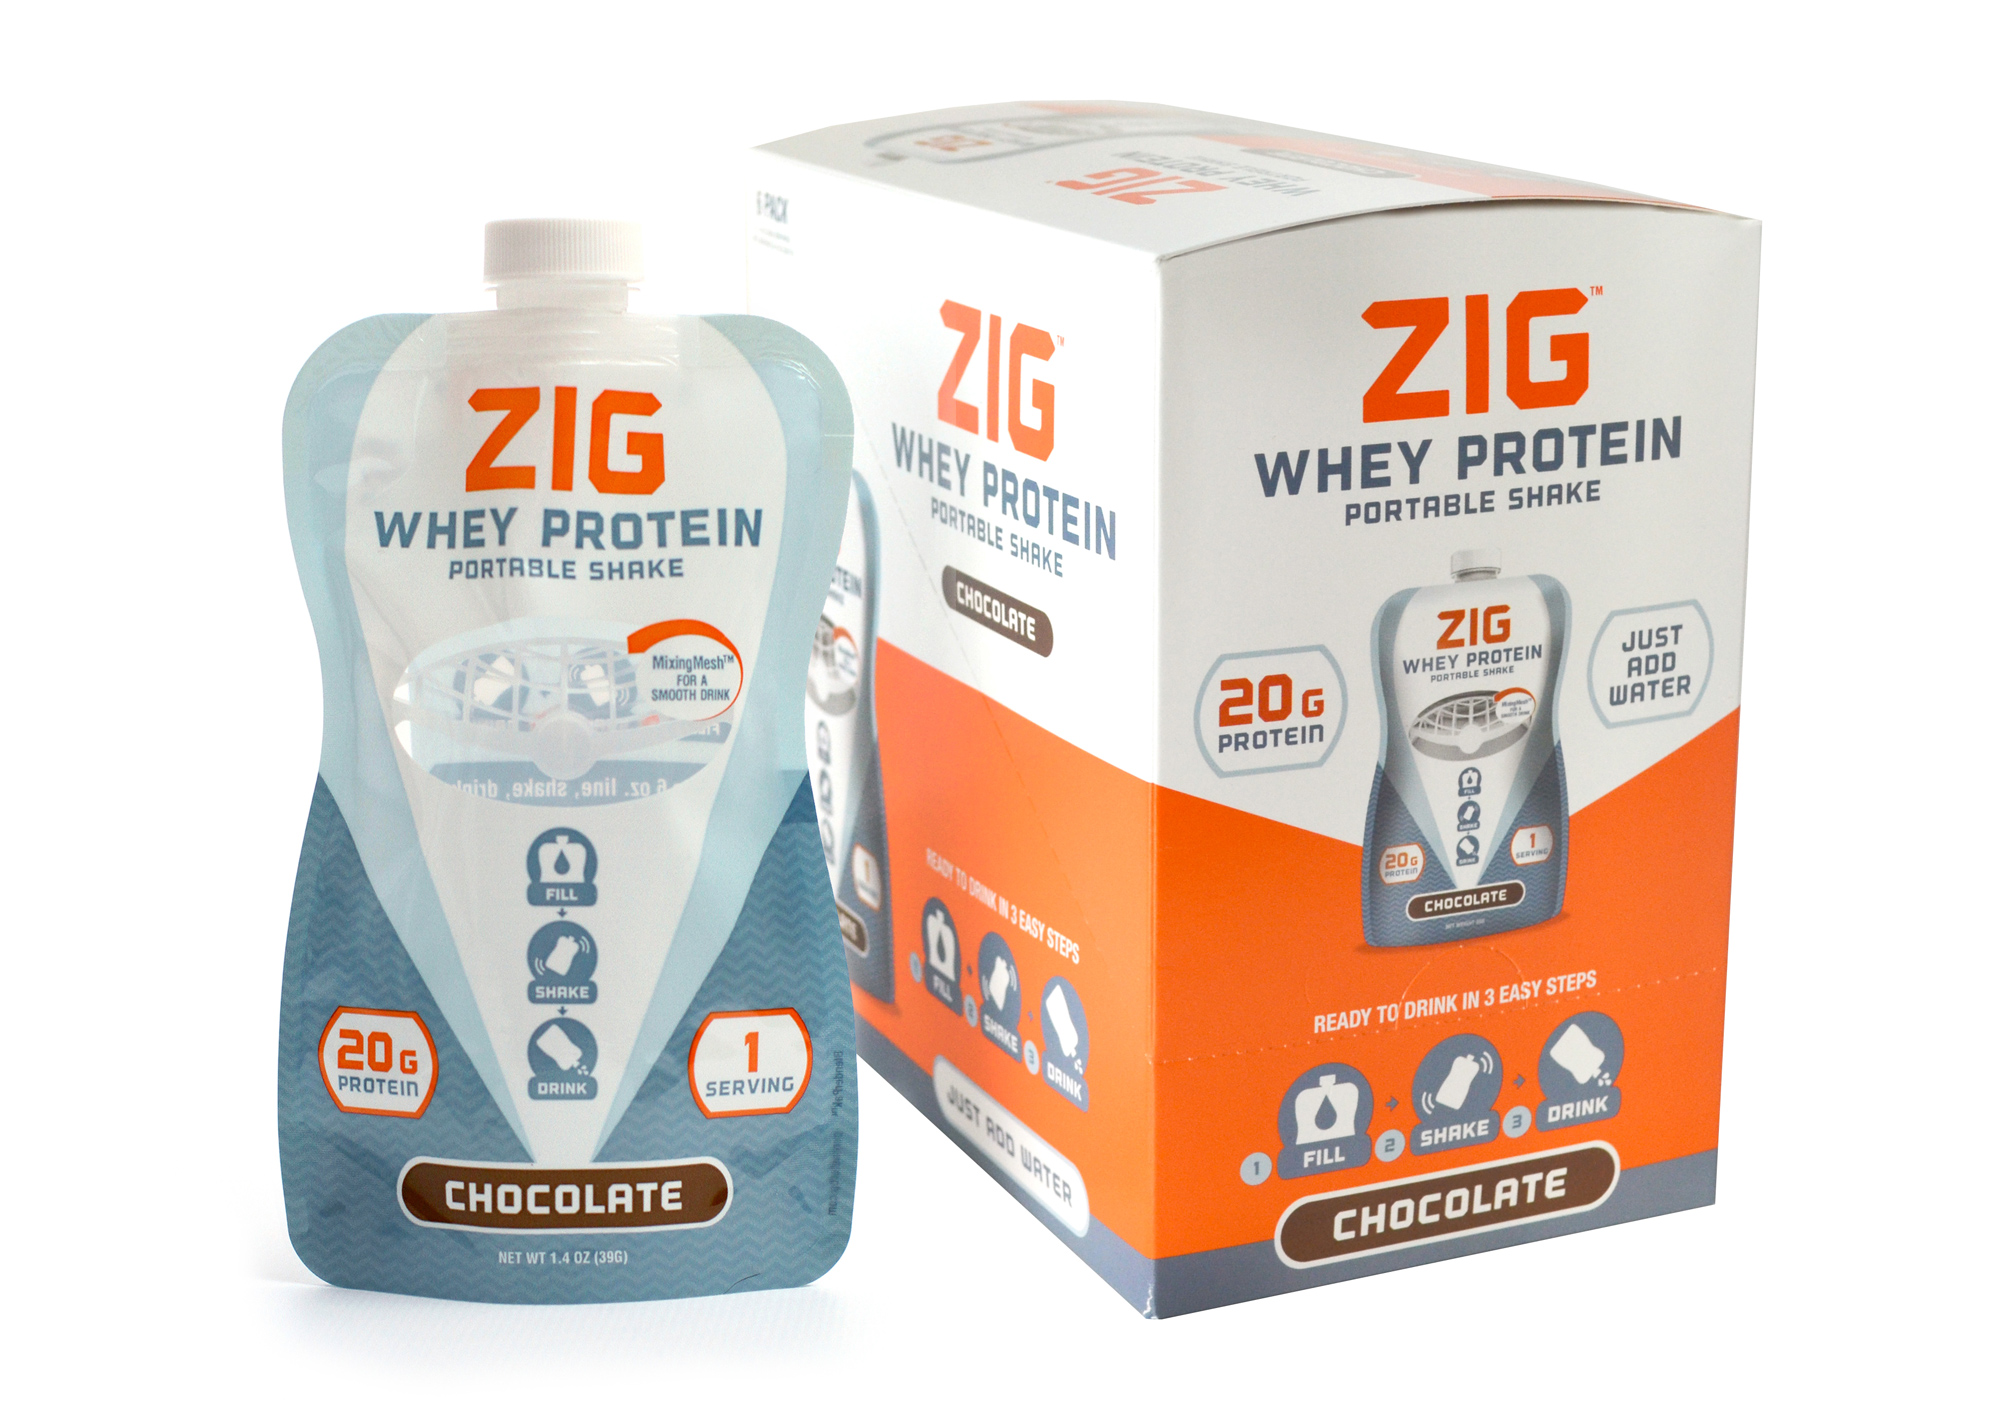 ZIG is a just-add-water portable protein shake. ZIG is sold online in 6-pack boxes.